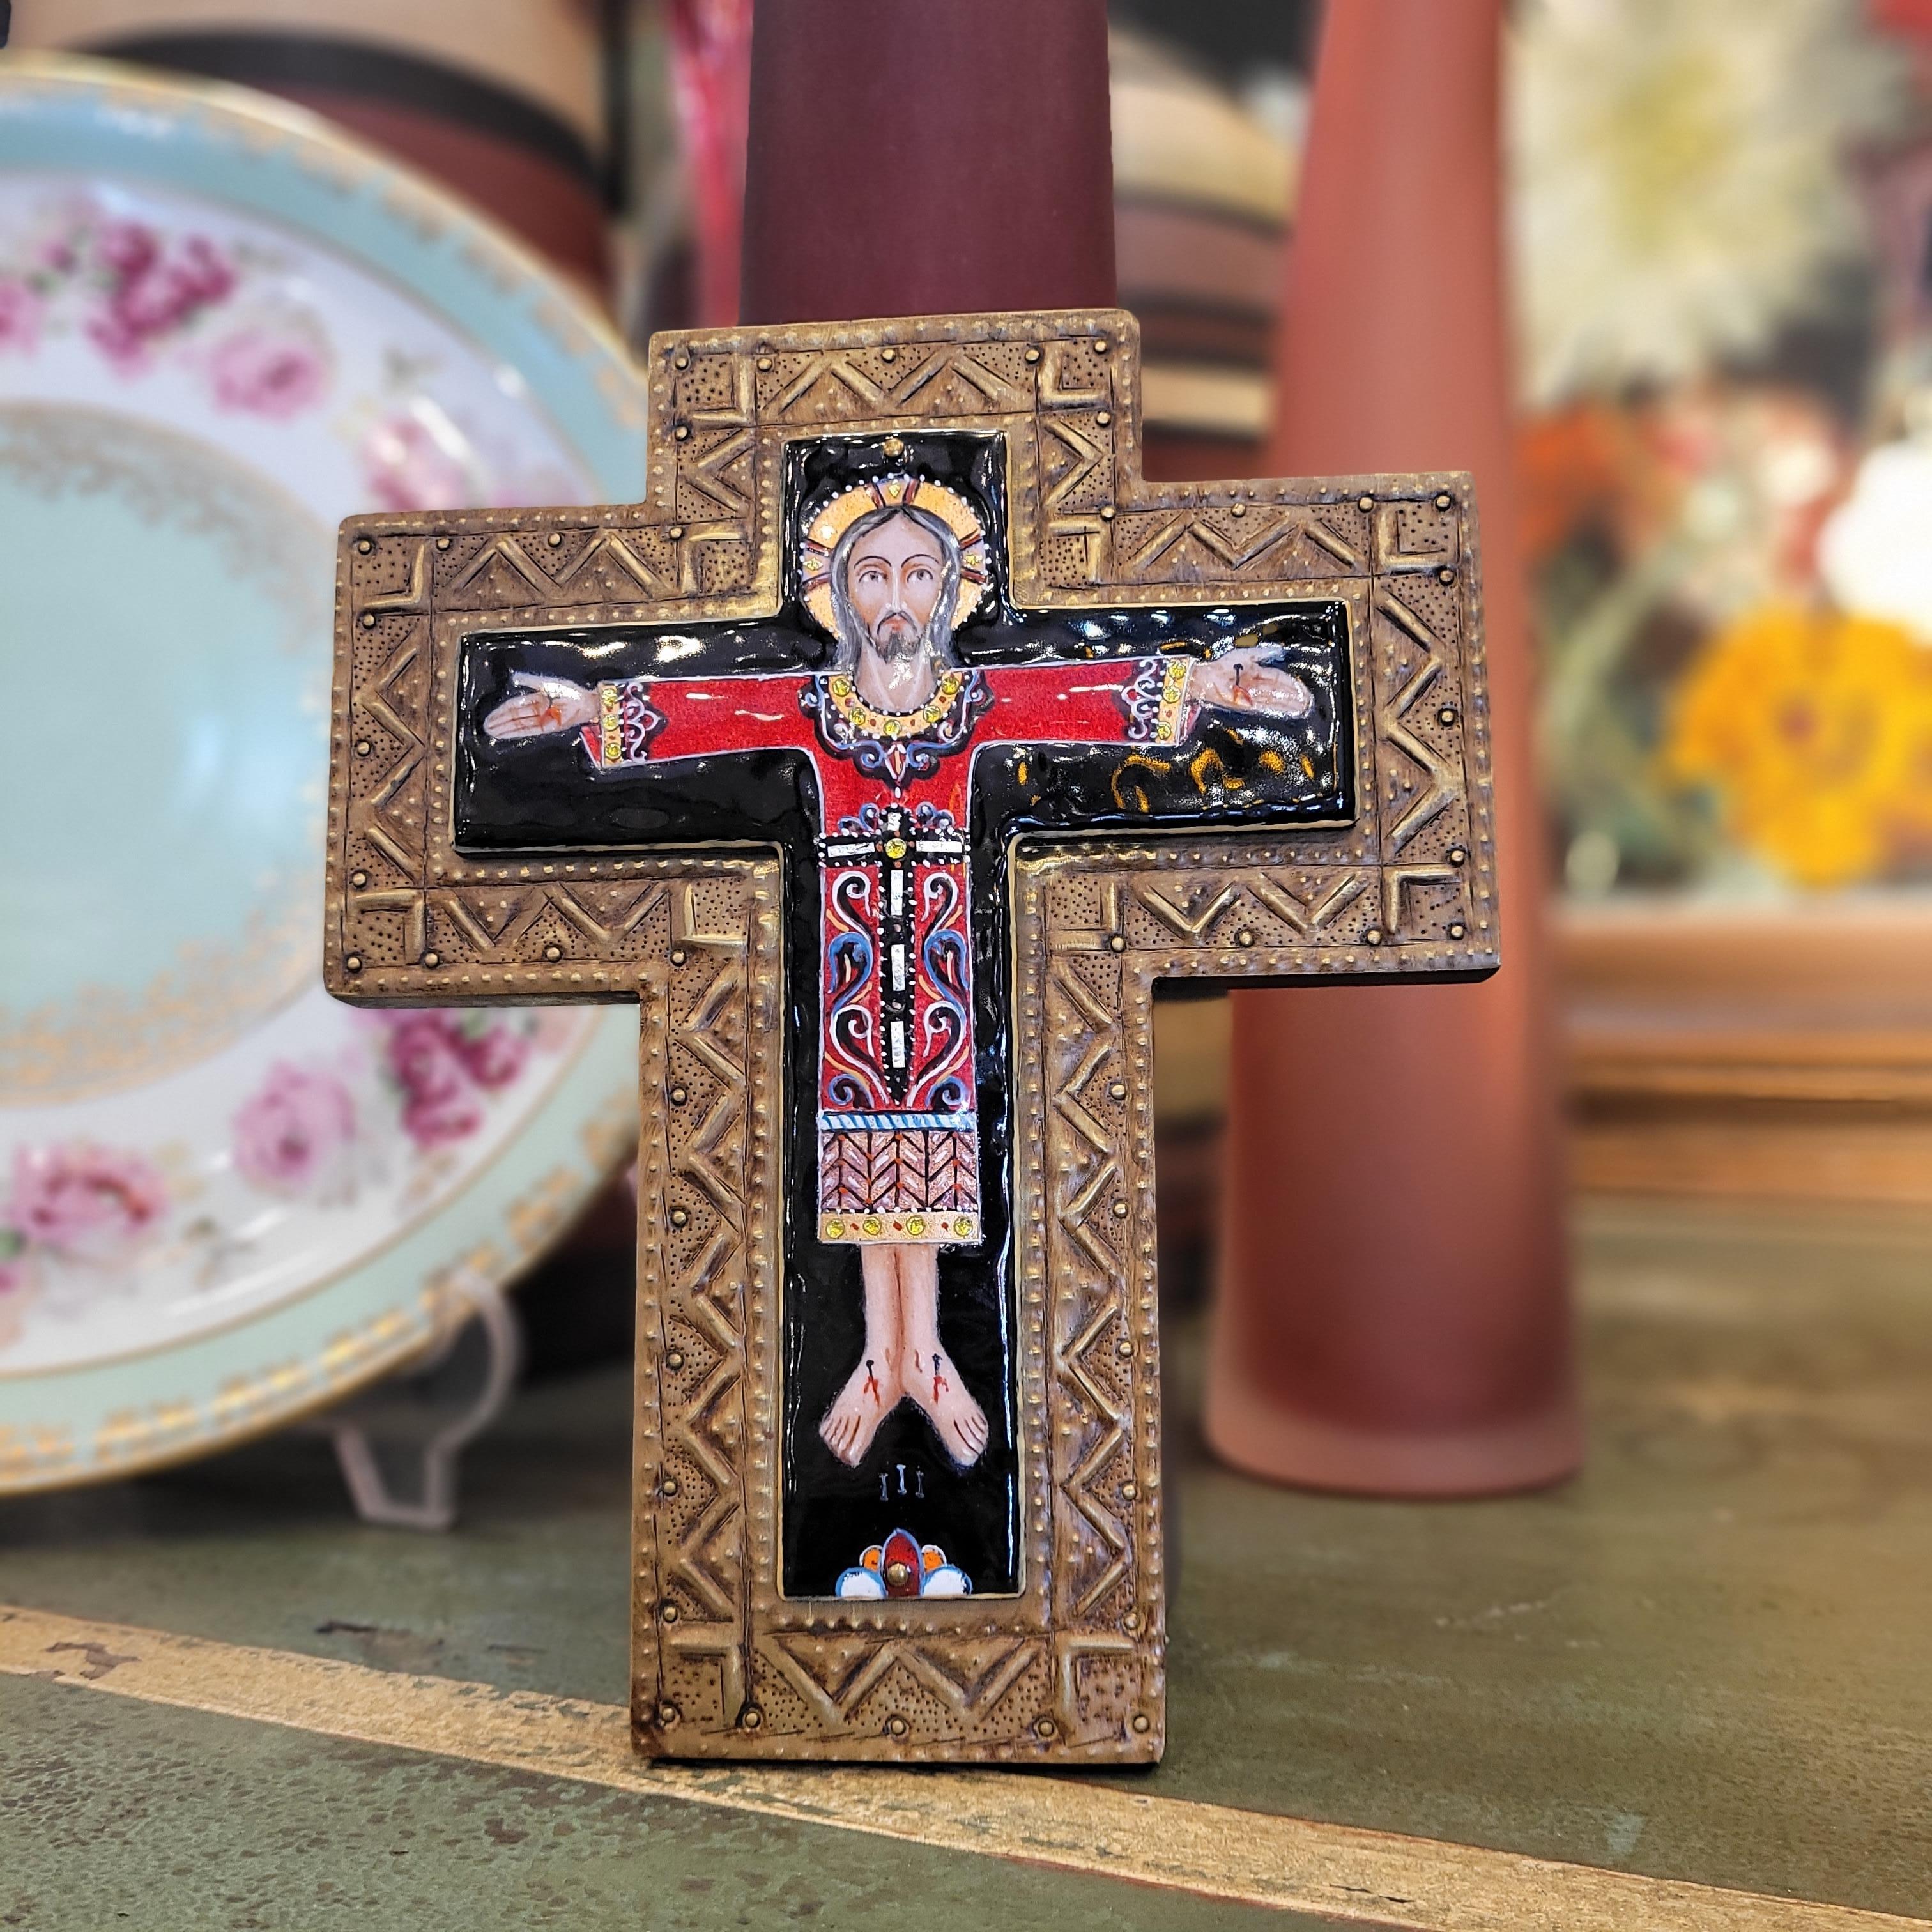 Exquisite  and very refined Image of a Byzantine Cross made of fired enamel in beautiful burgundy colors, blue gold with intarsia of semi-precious stones and mother of pearl, the entire piece is handcrafted. The cross is in high relief on a wooden